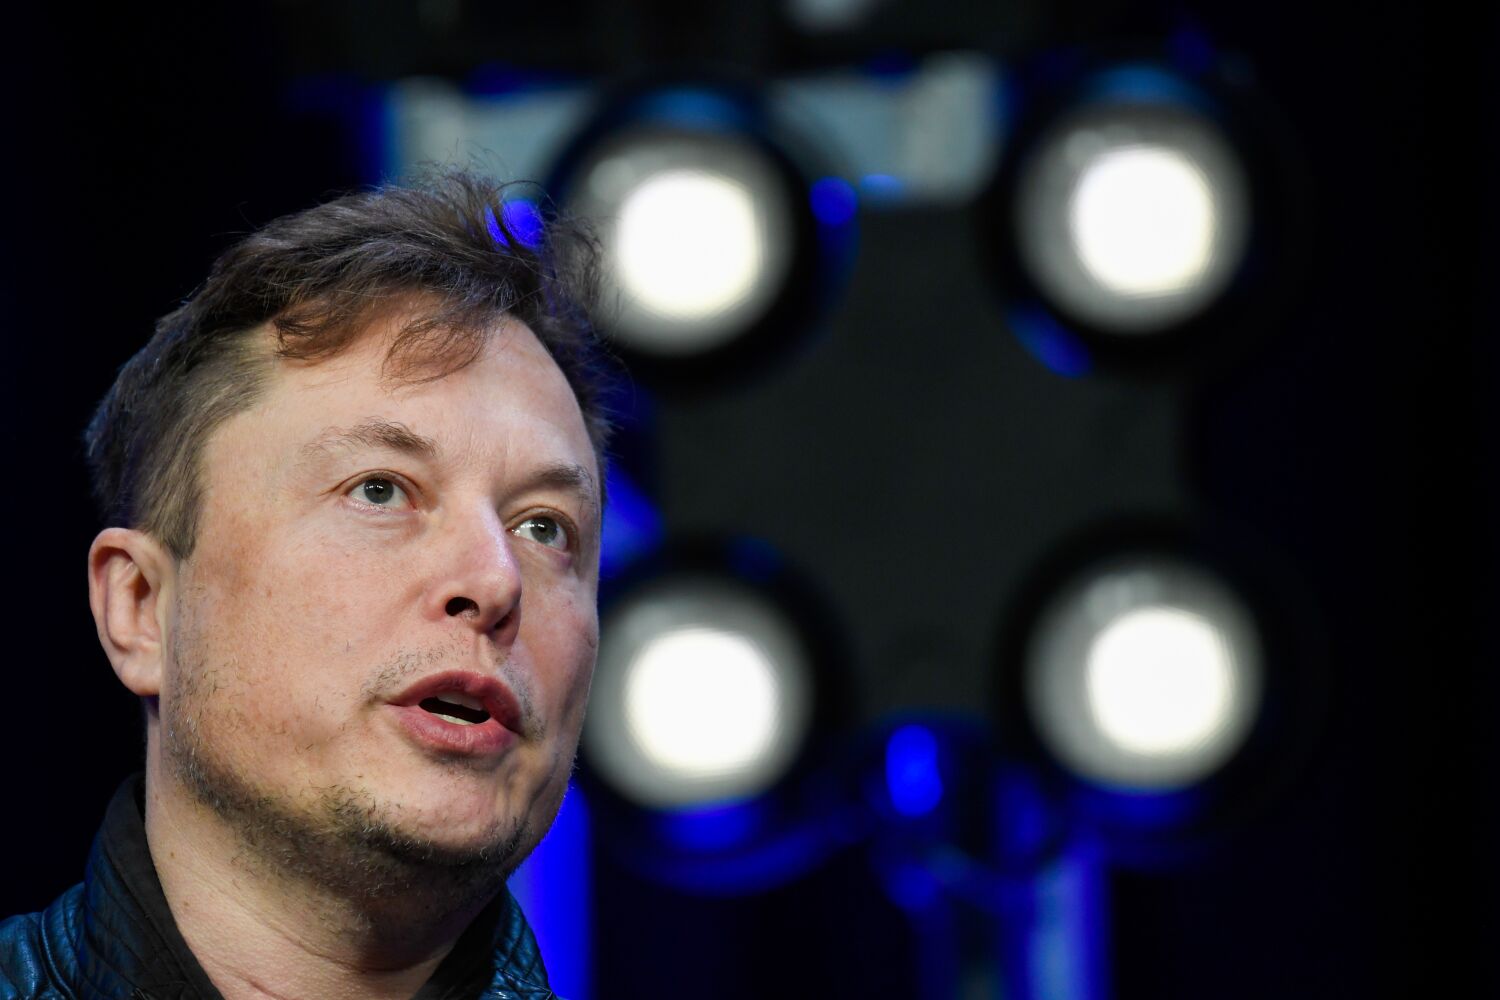 Twitter suspends accounts of several journalists who covered Elon Musk